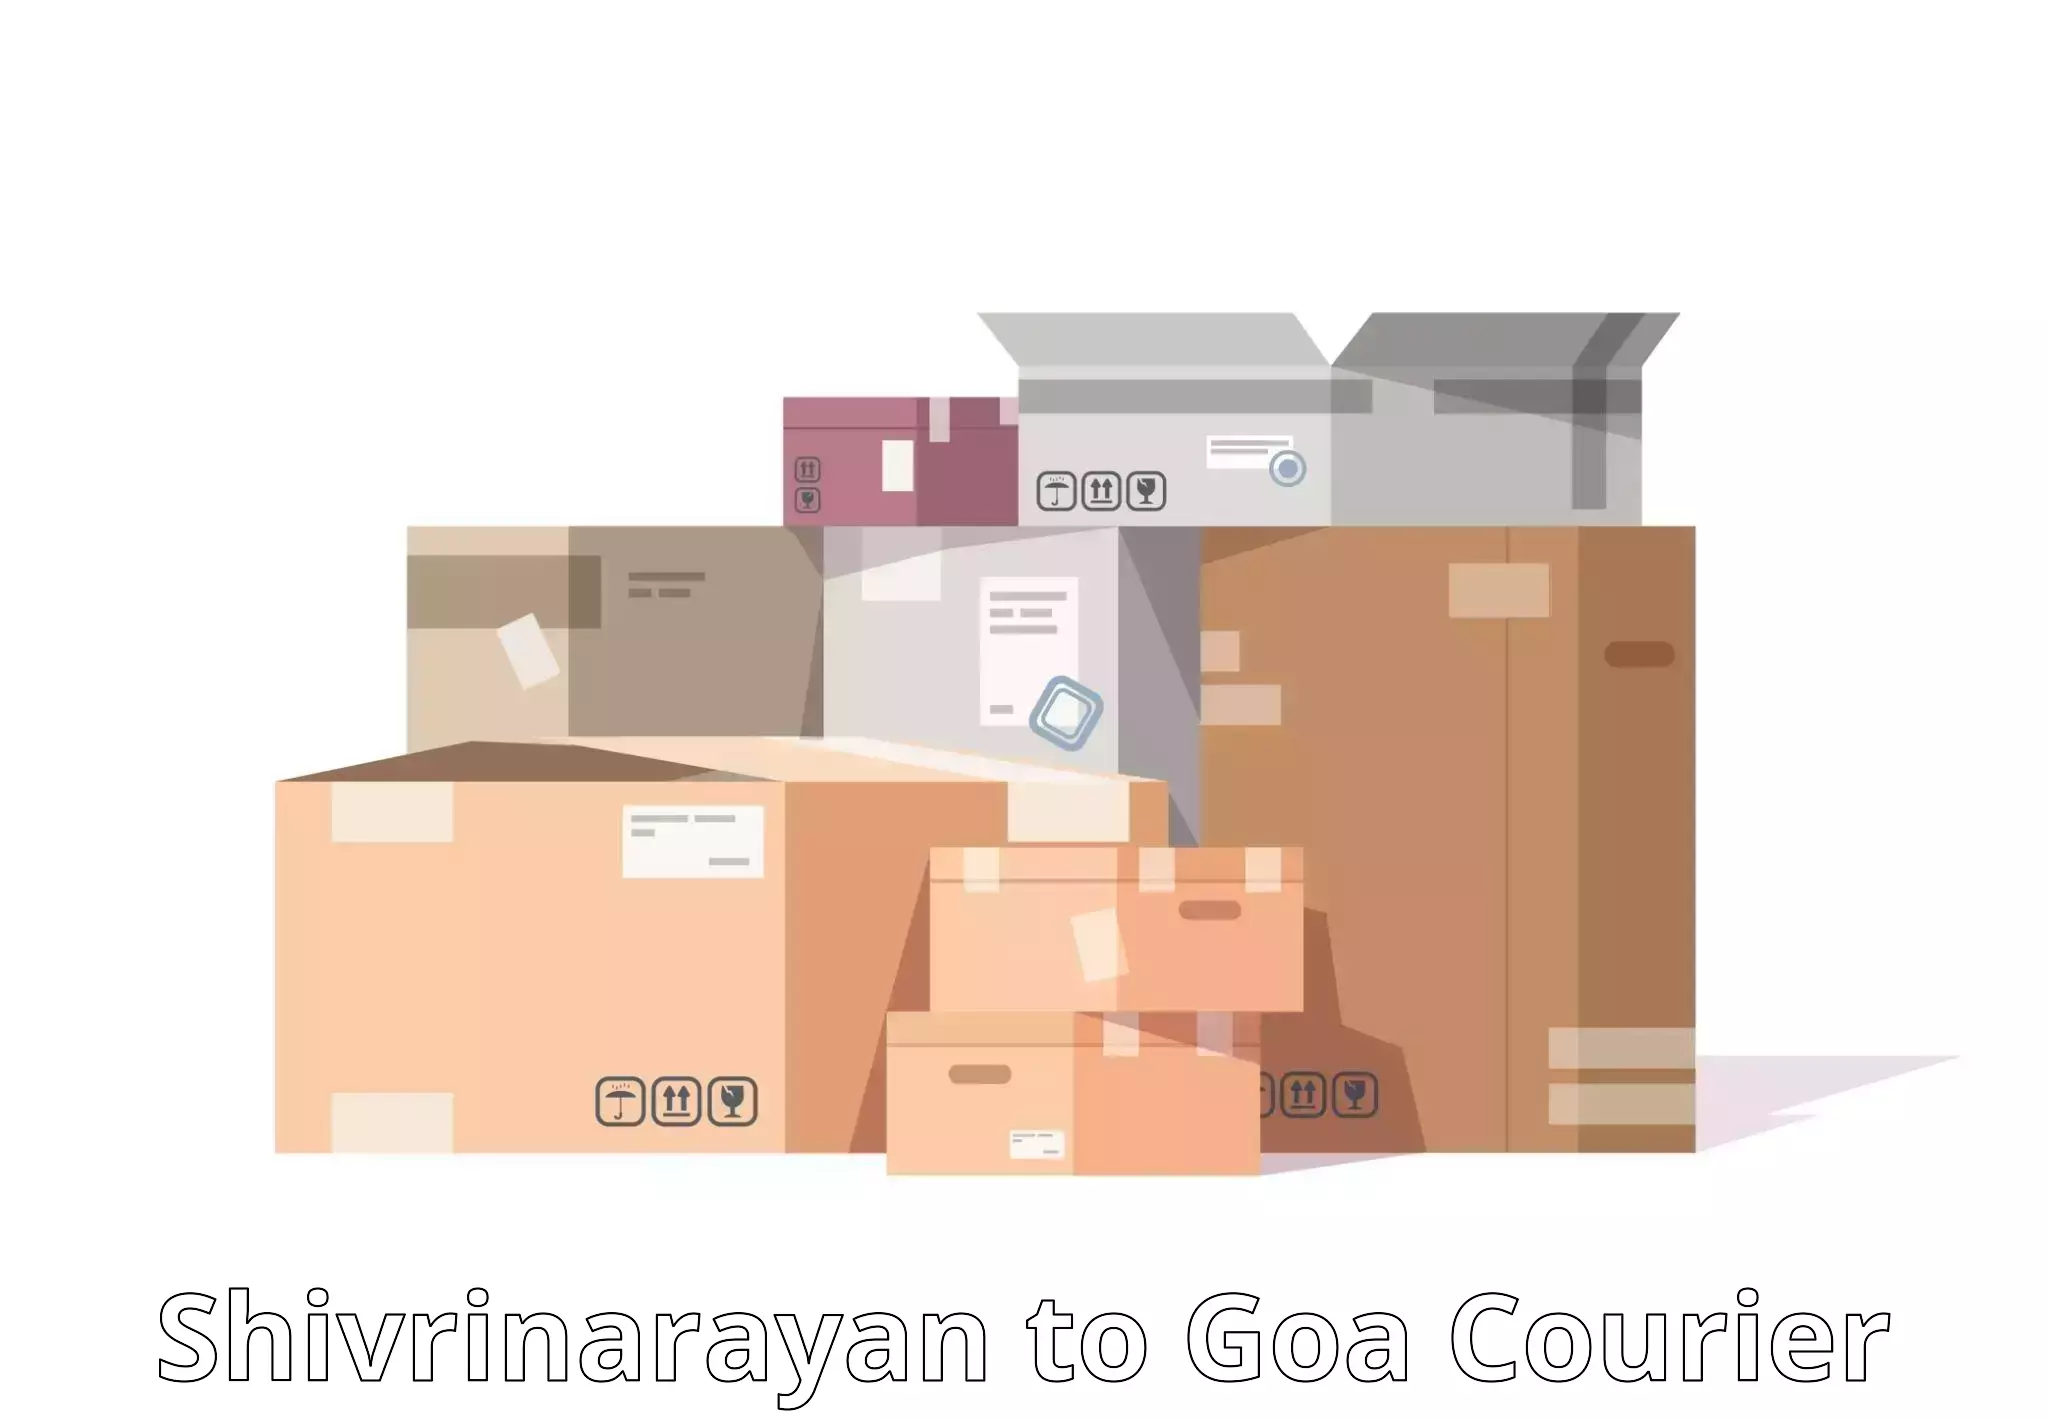 Sustainable shipping practices Shivrinarayan to South Goa